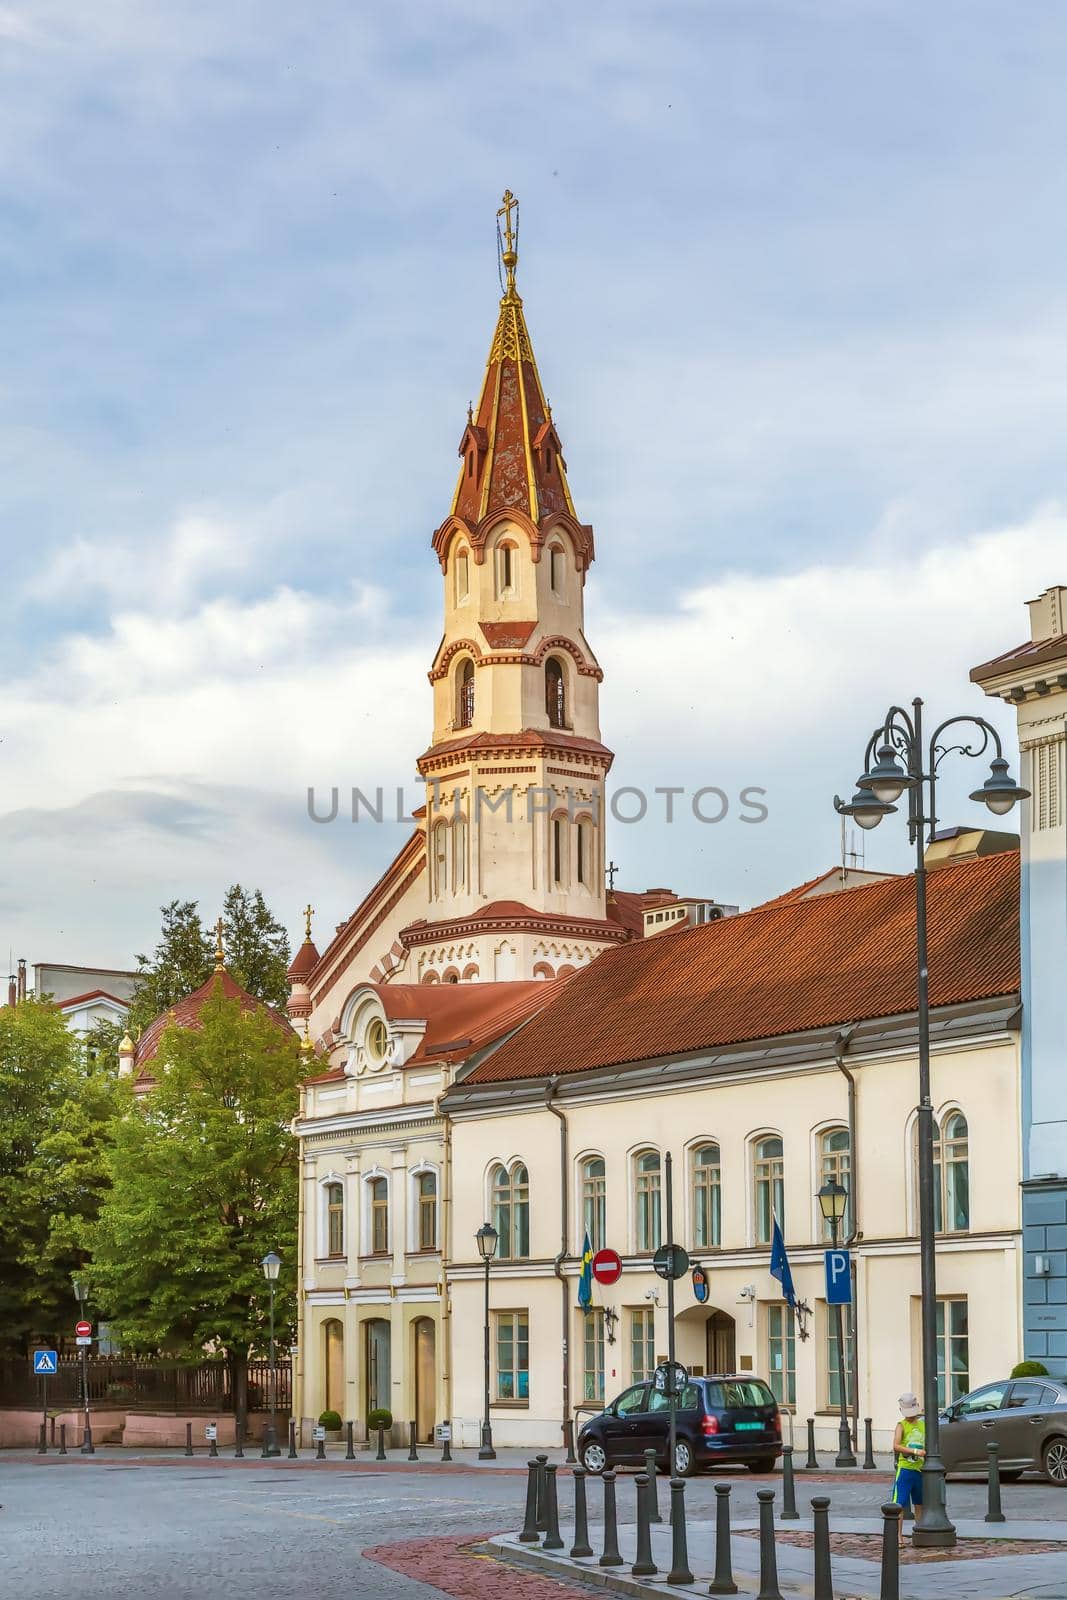 St. Nicholas Church is one of the oldest Eastern Orthodox churches in Vilnius, Lithuania